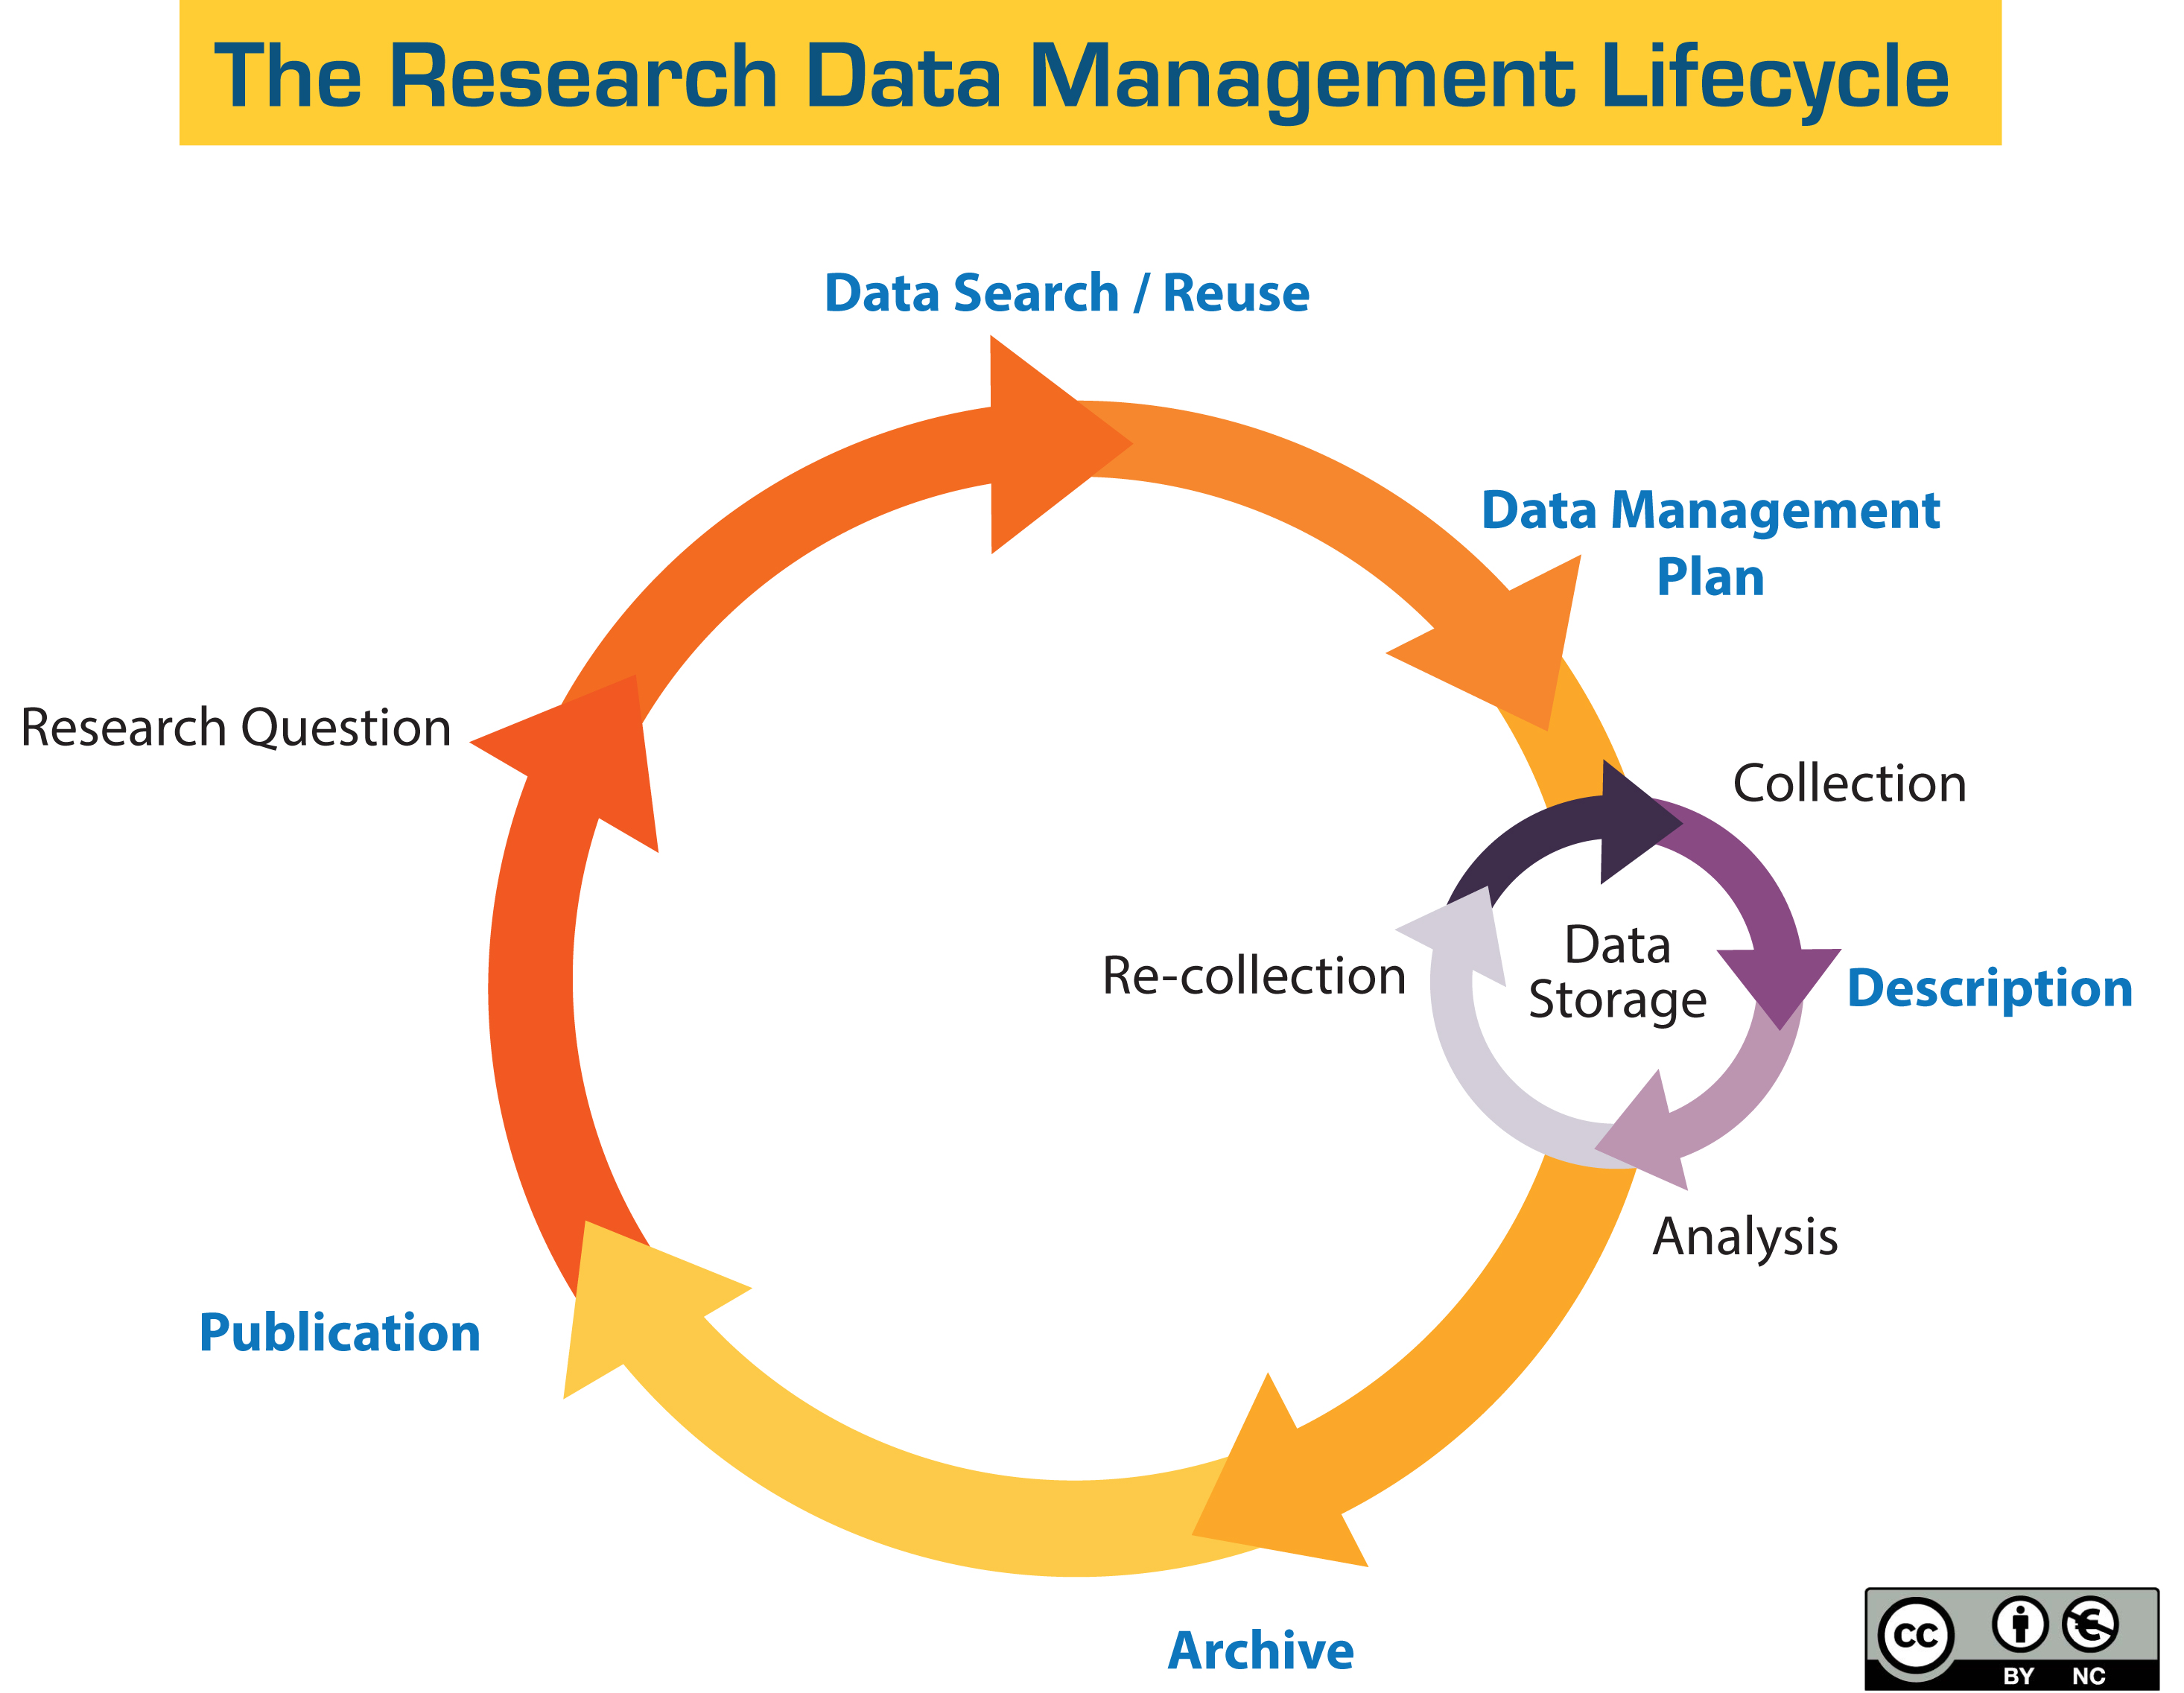 Research data management lifecycle illustration